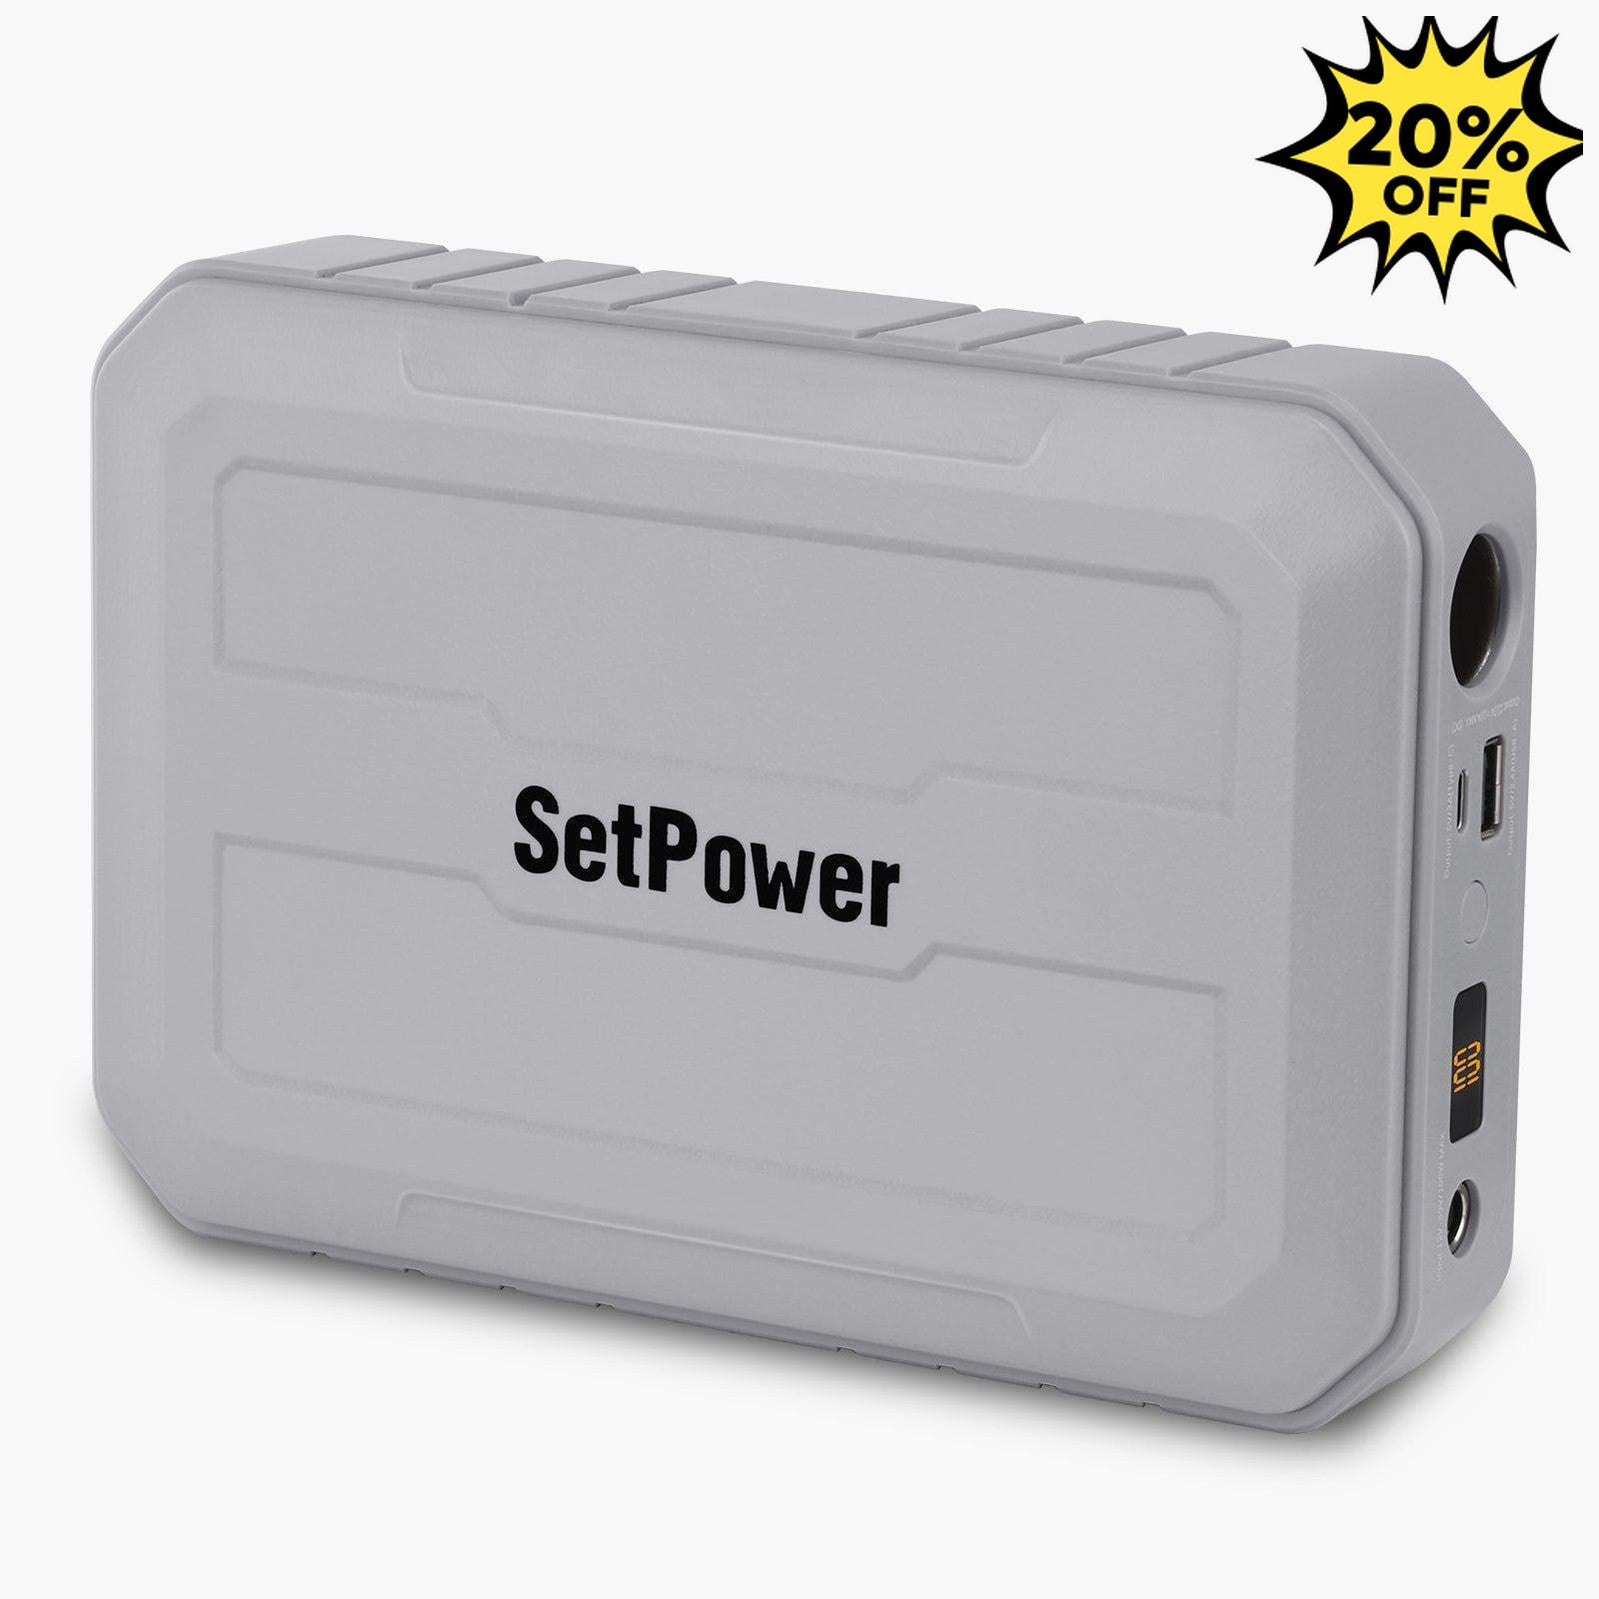 Setpower PG216Wh Portable Power Station Power Bank - $159 Only